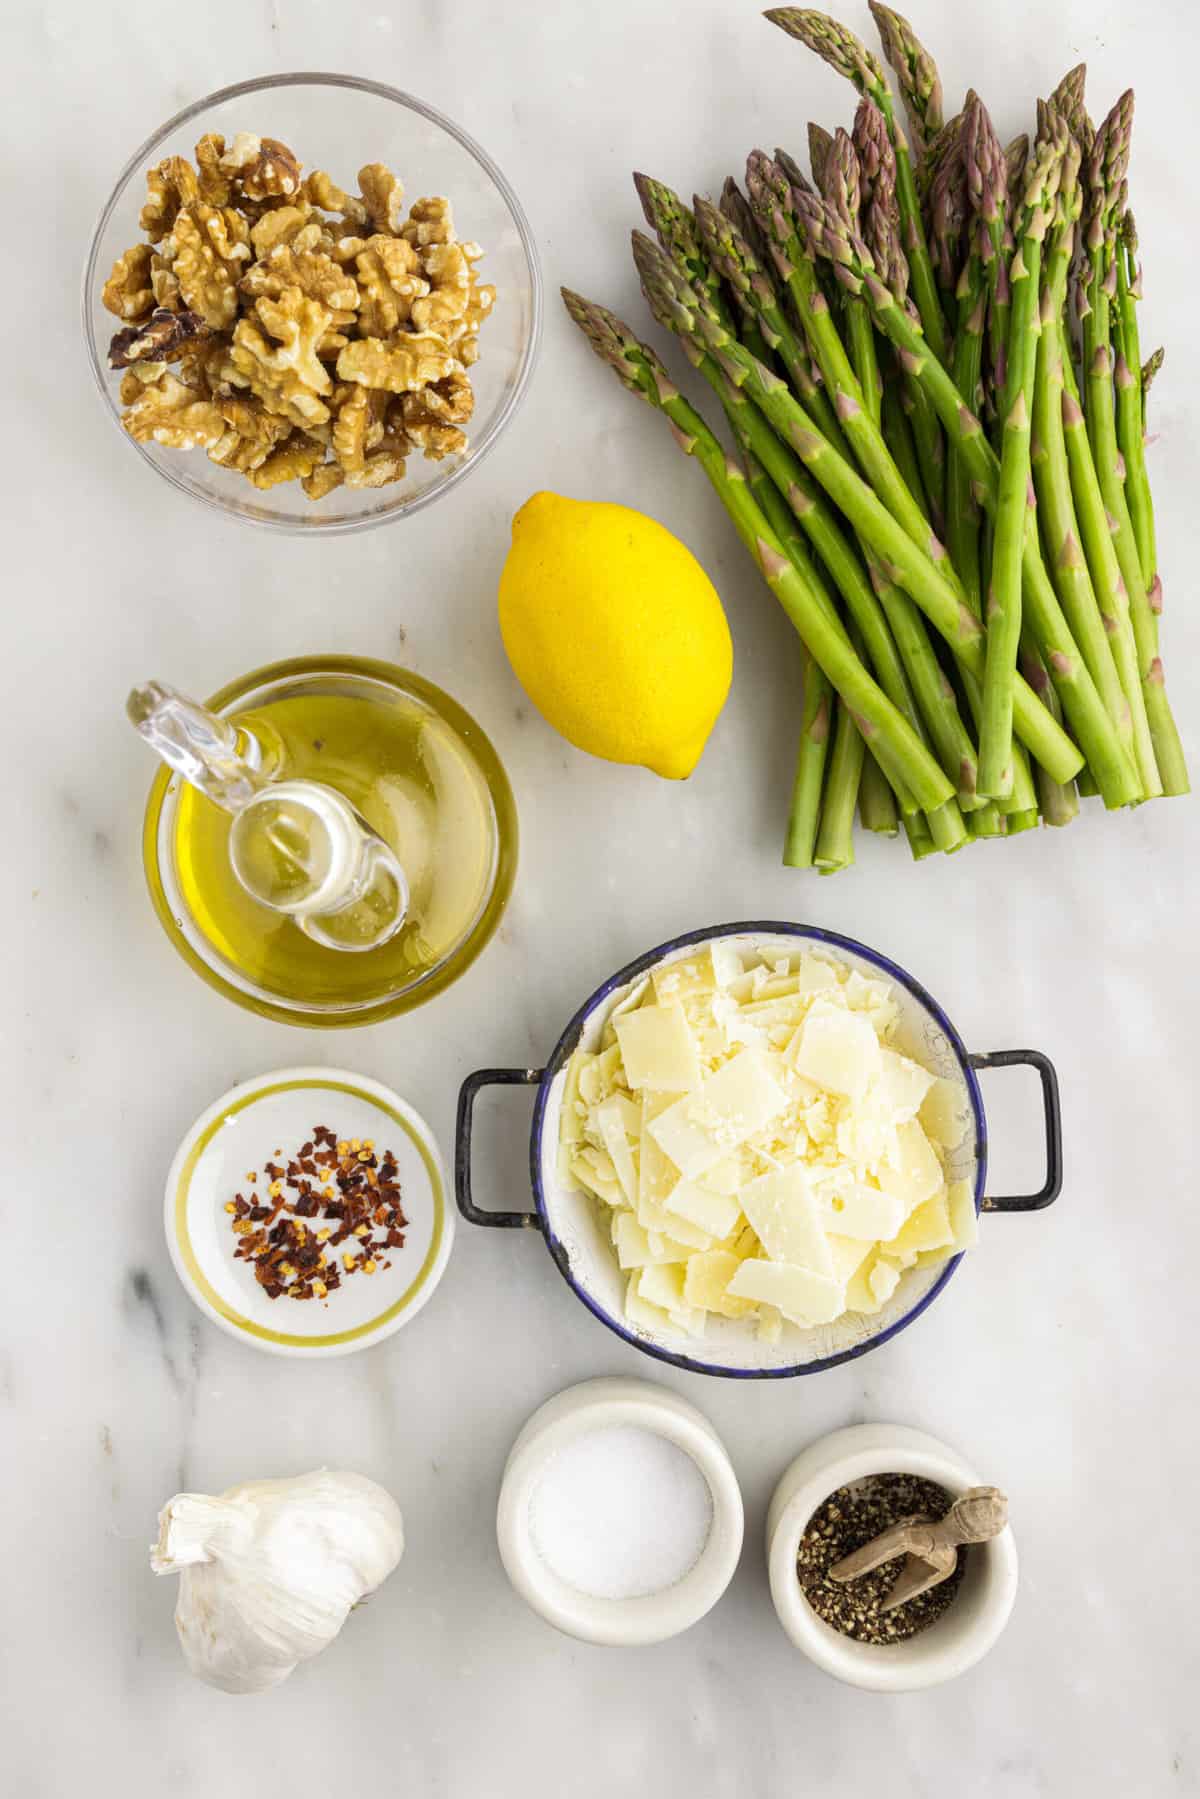 The ingredients for asparagus salad are placed on a white surface.